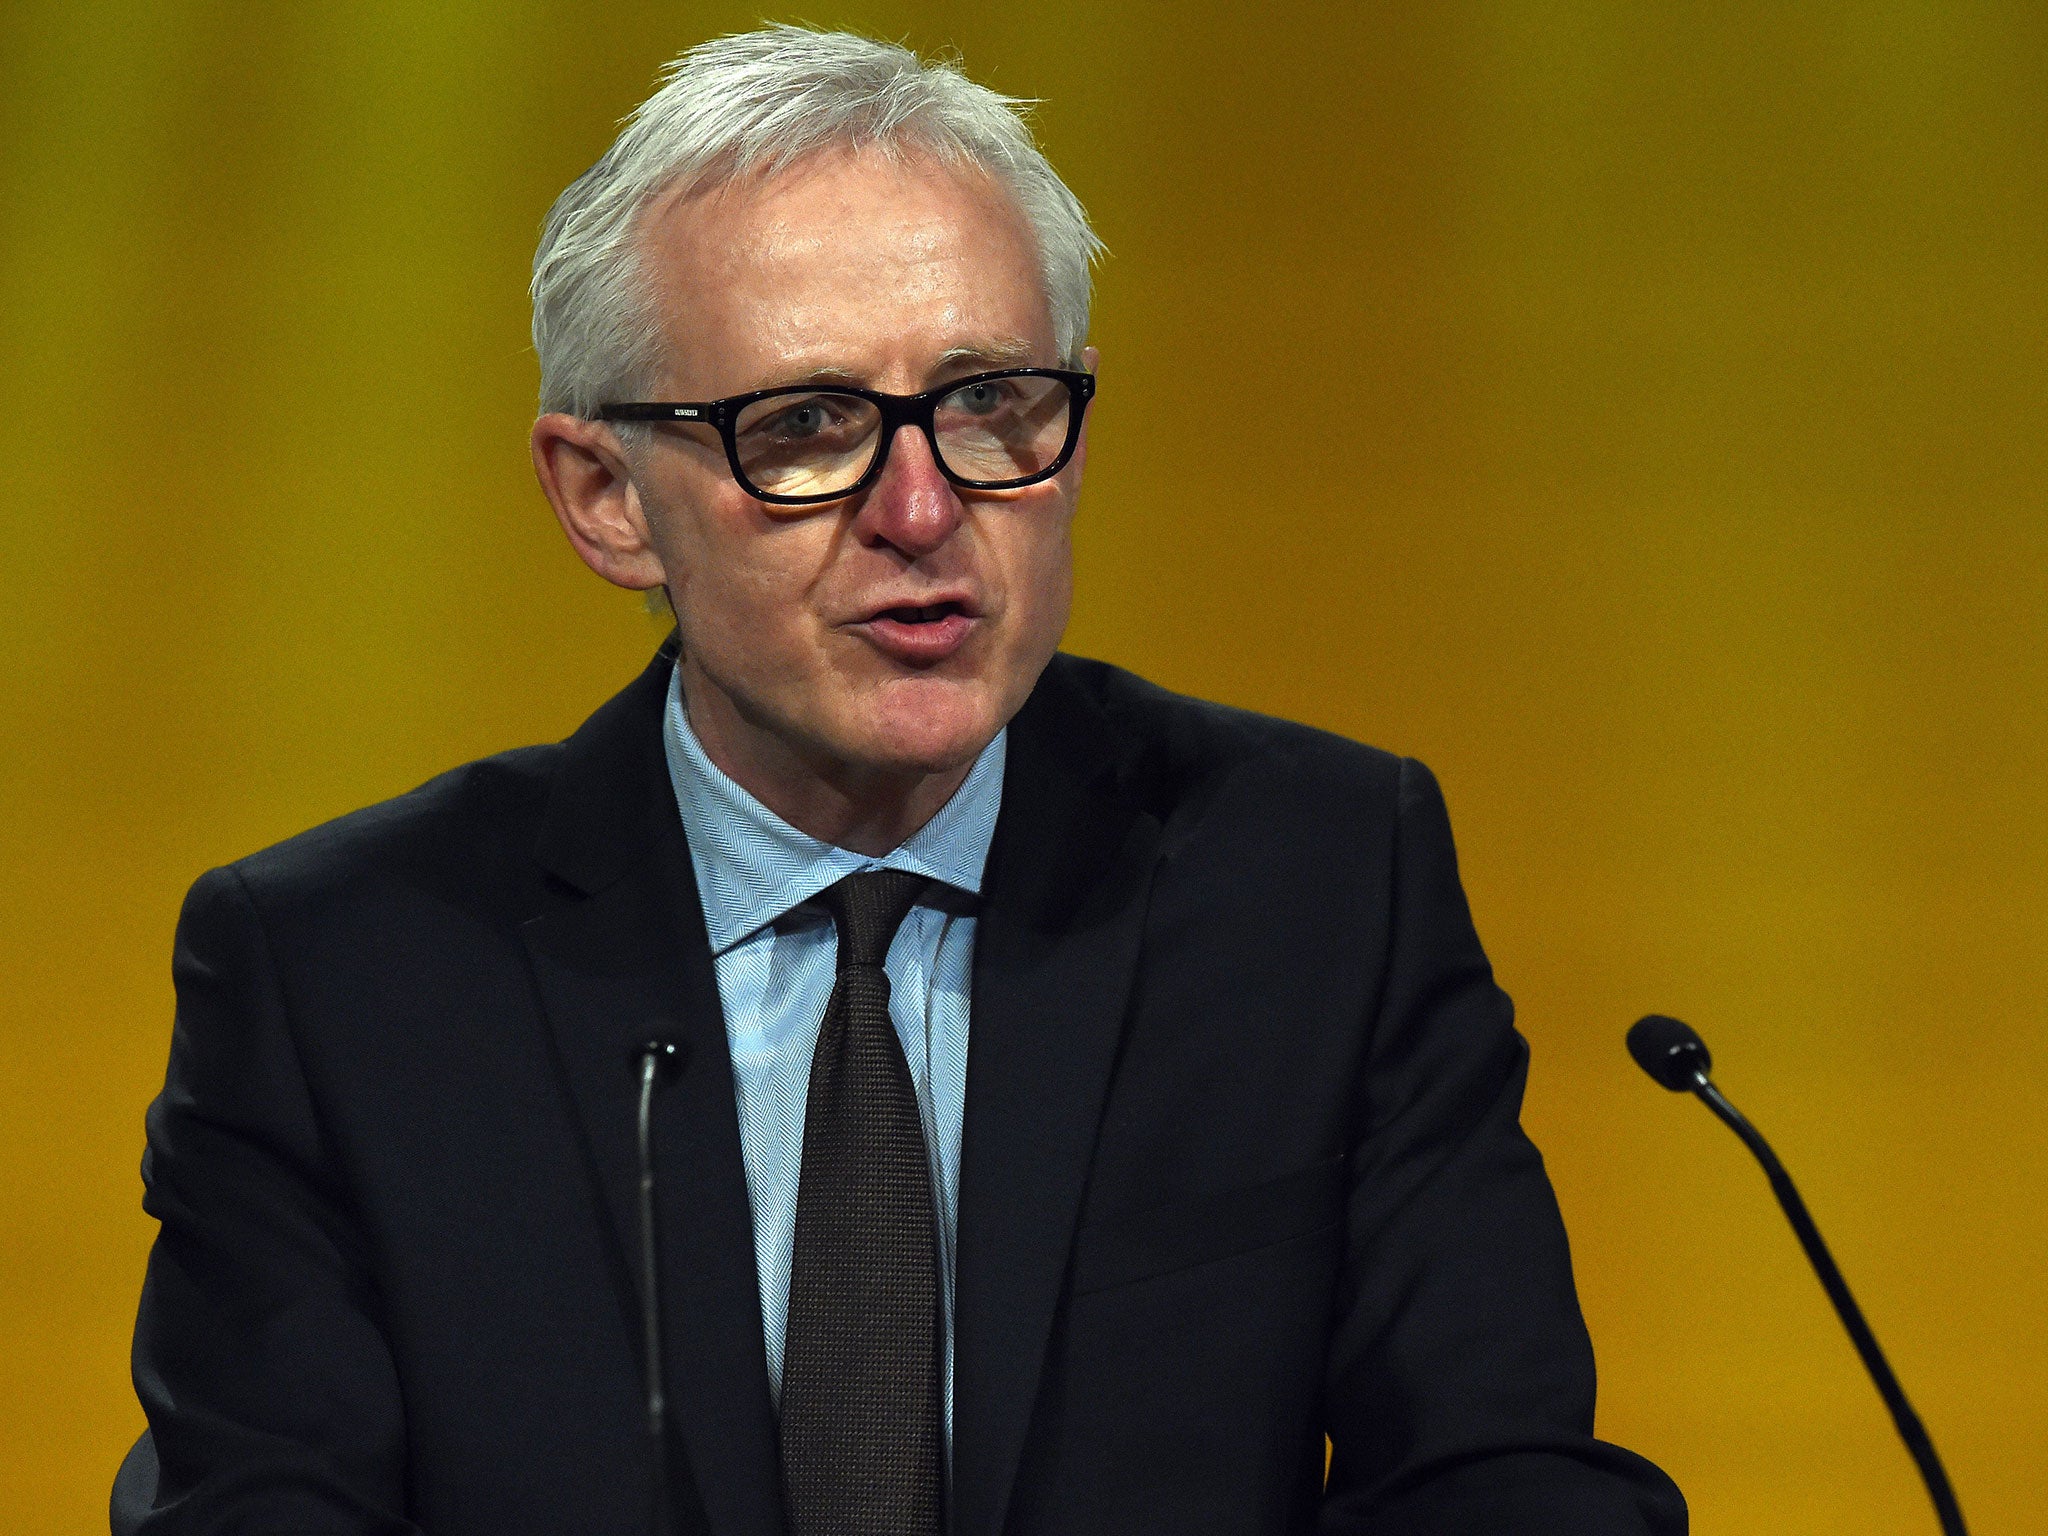 “More people are stuck in hospital now because the number living with chronic conditions is growing at a dramatic rate. This is imposing extraordinary pressure,” Norman Lamb said.